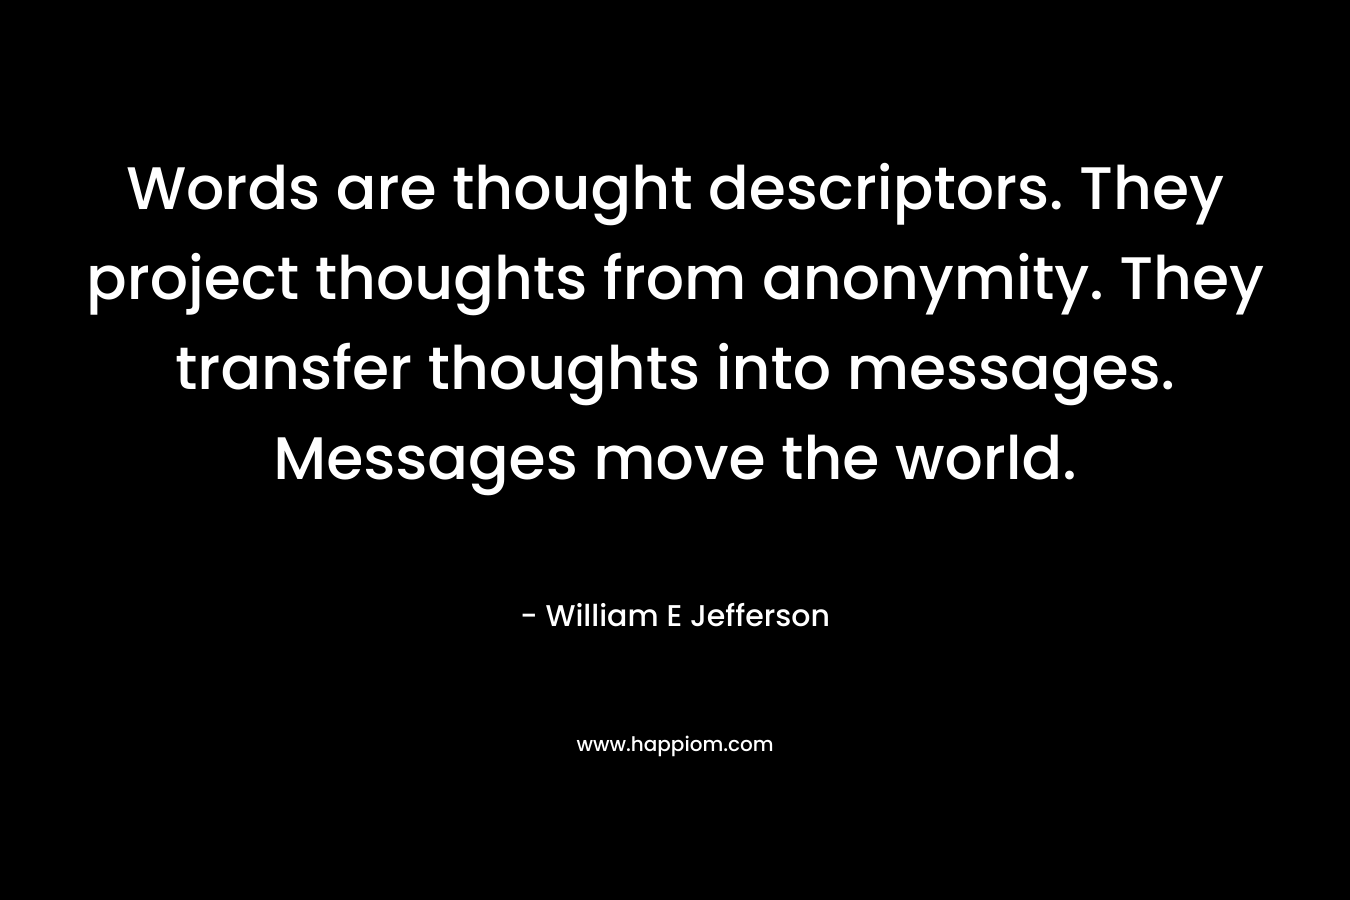 Words are thought descriptors. They project thoughts from anonymity. They transfer thoughts into messages. Messages move the world. – William E Jefferson